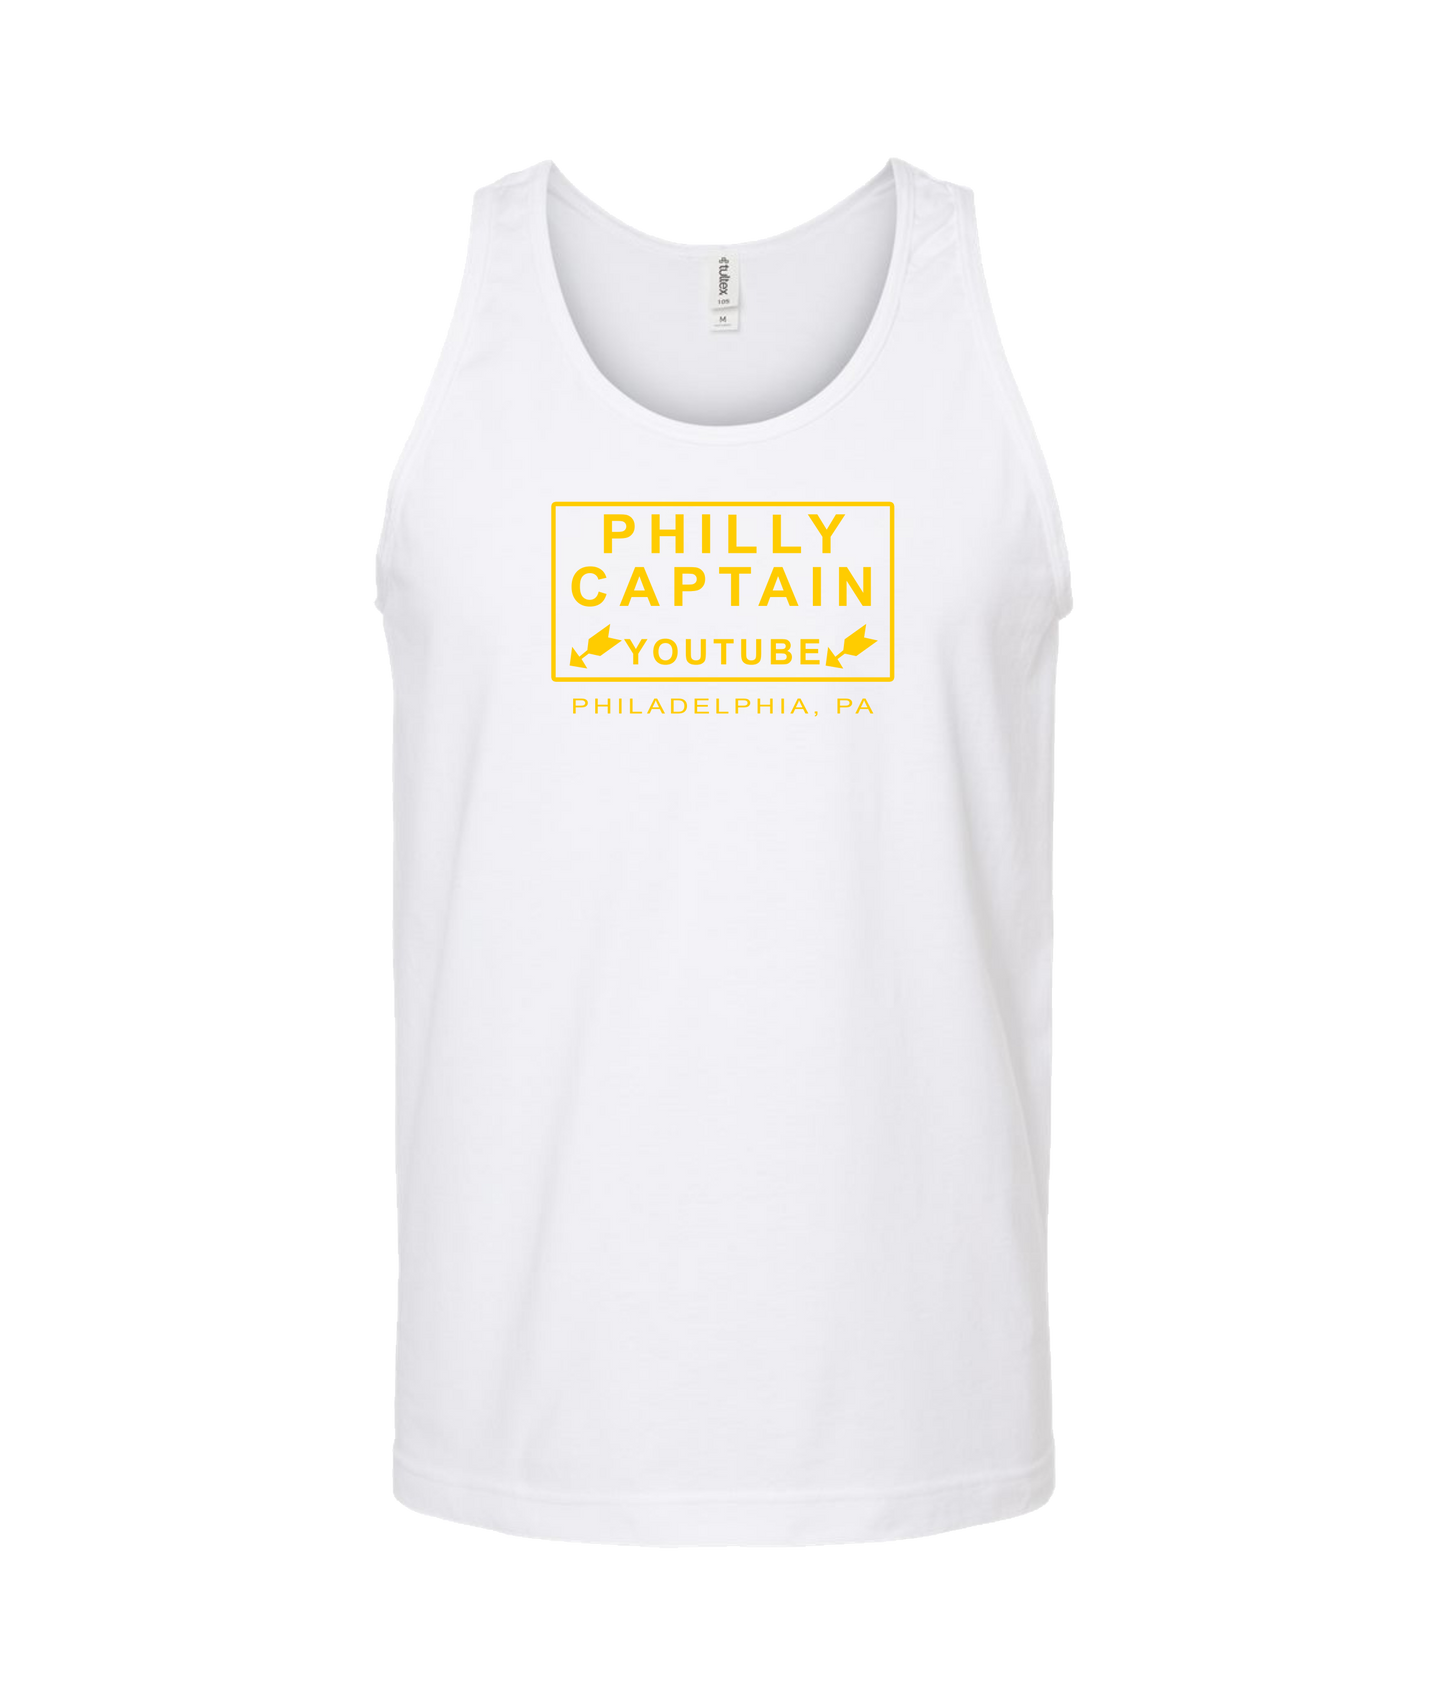 The Philly Captain's Merch is Fire - YouTube - White Tank Top